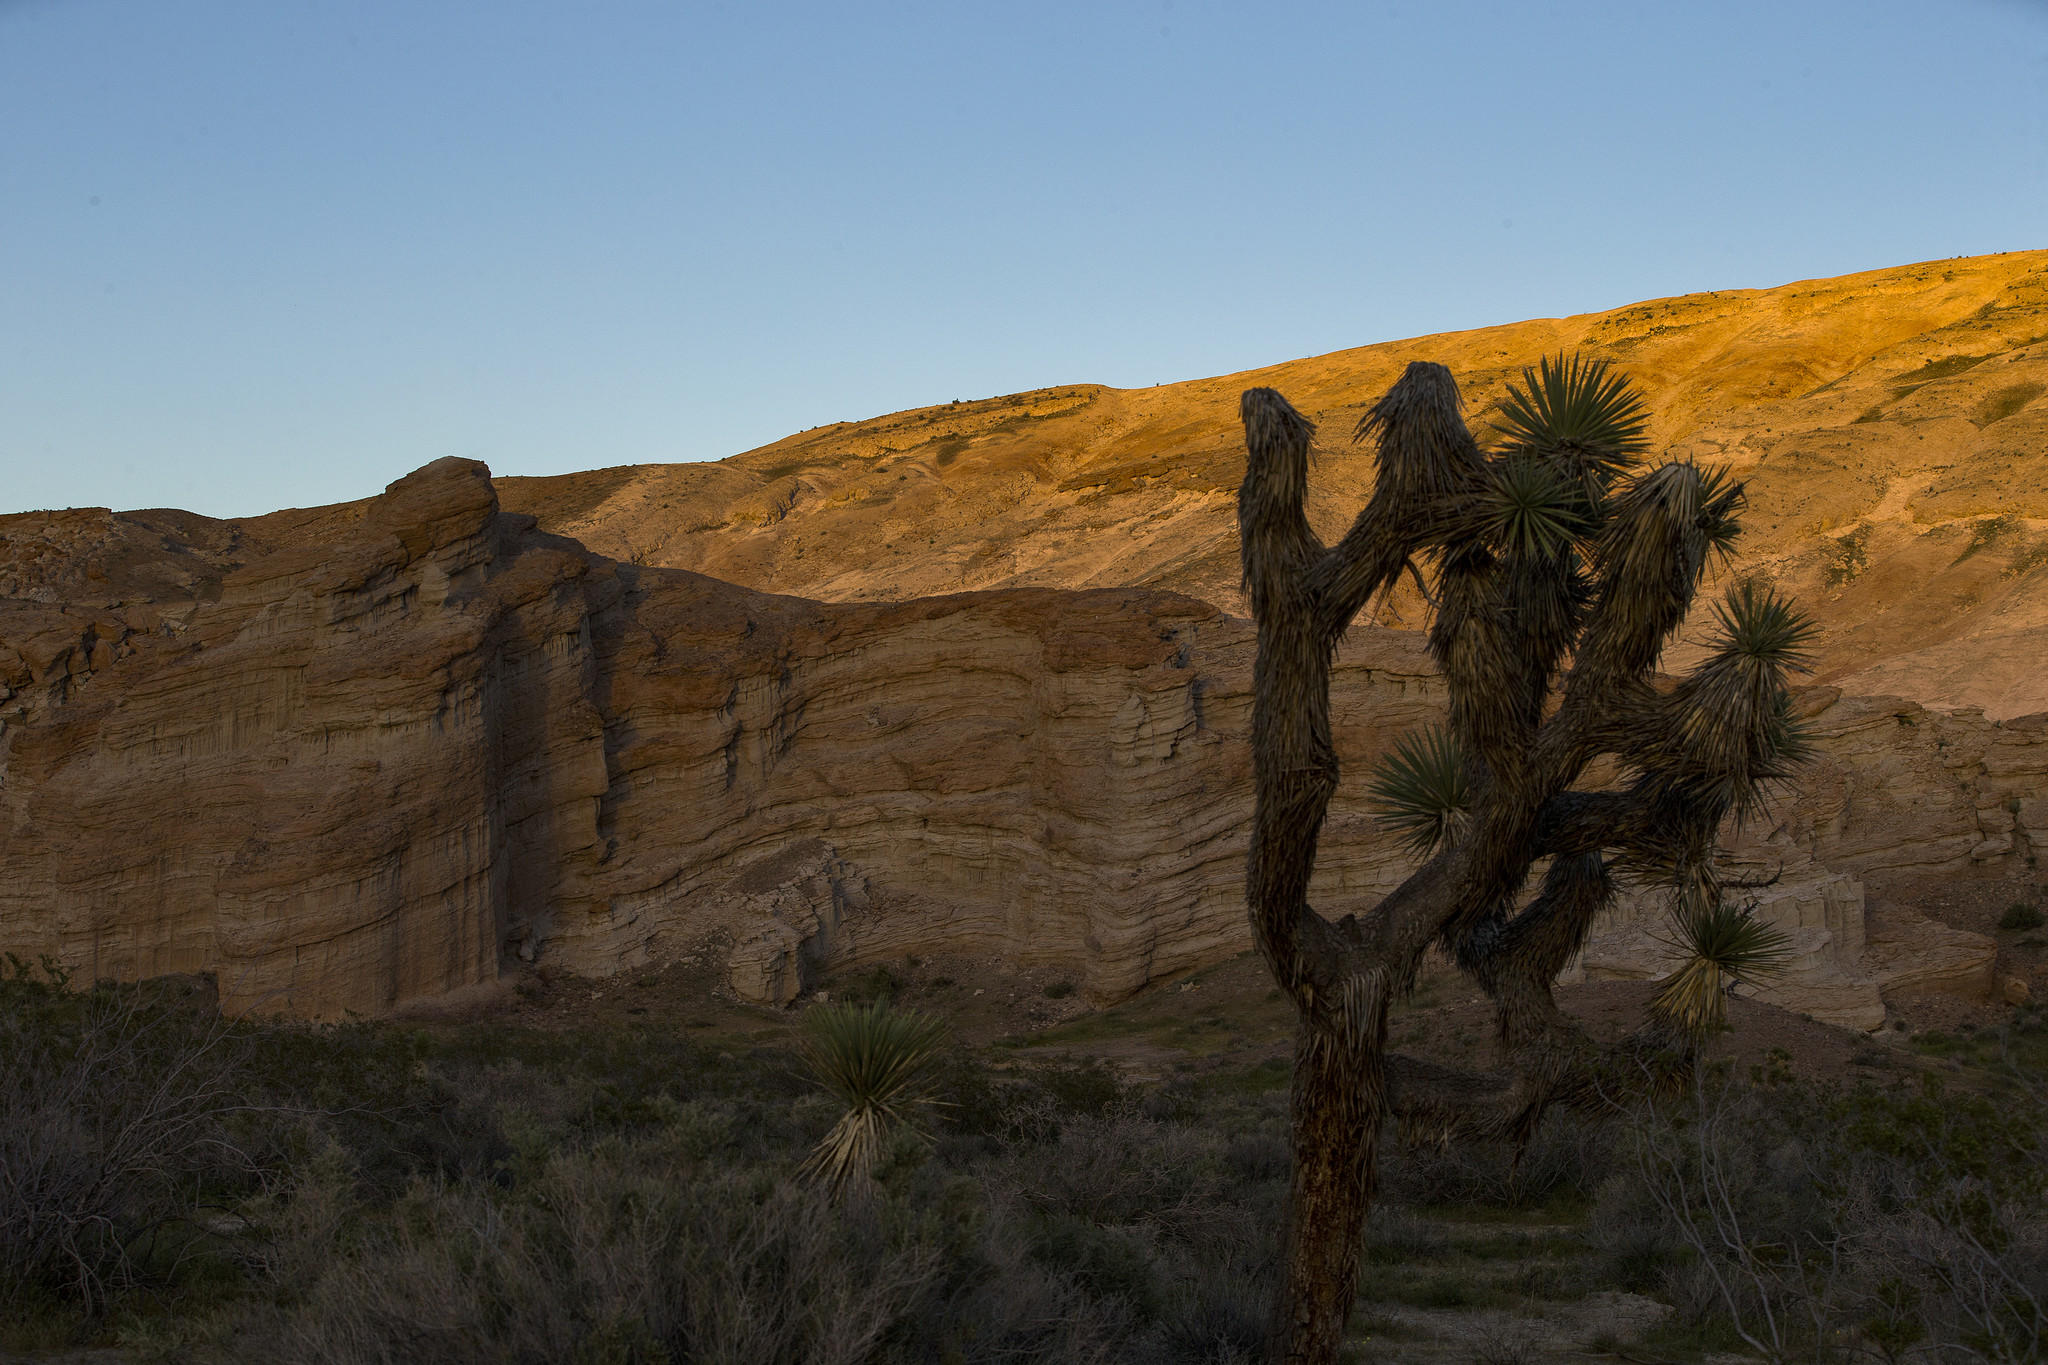 Joshua Trees are silhouetted against the hillside near the Red Rock Canyon Ricardo campground in the Red Rock Canyon State Park.